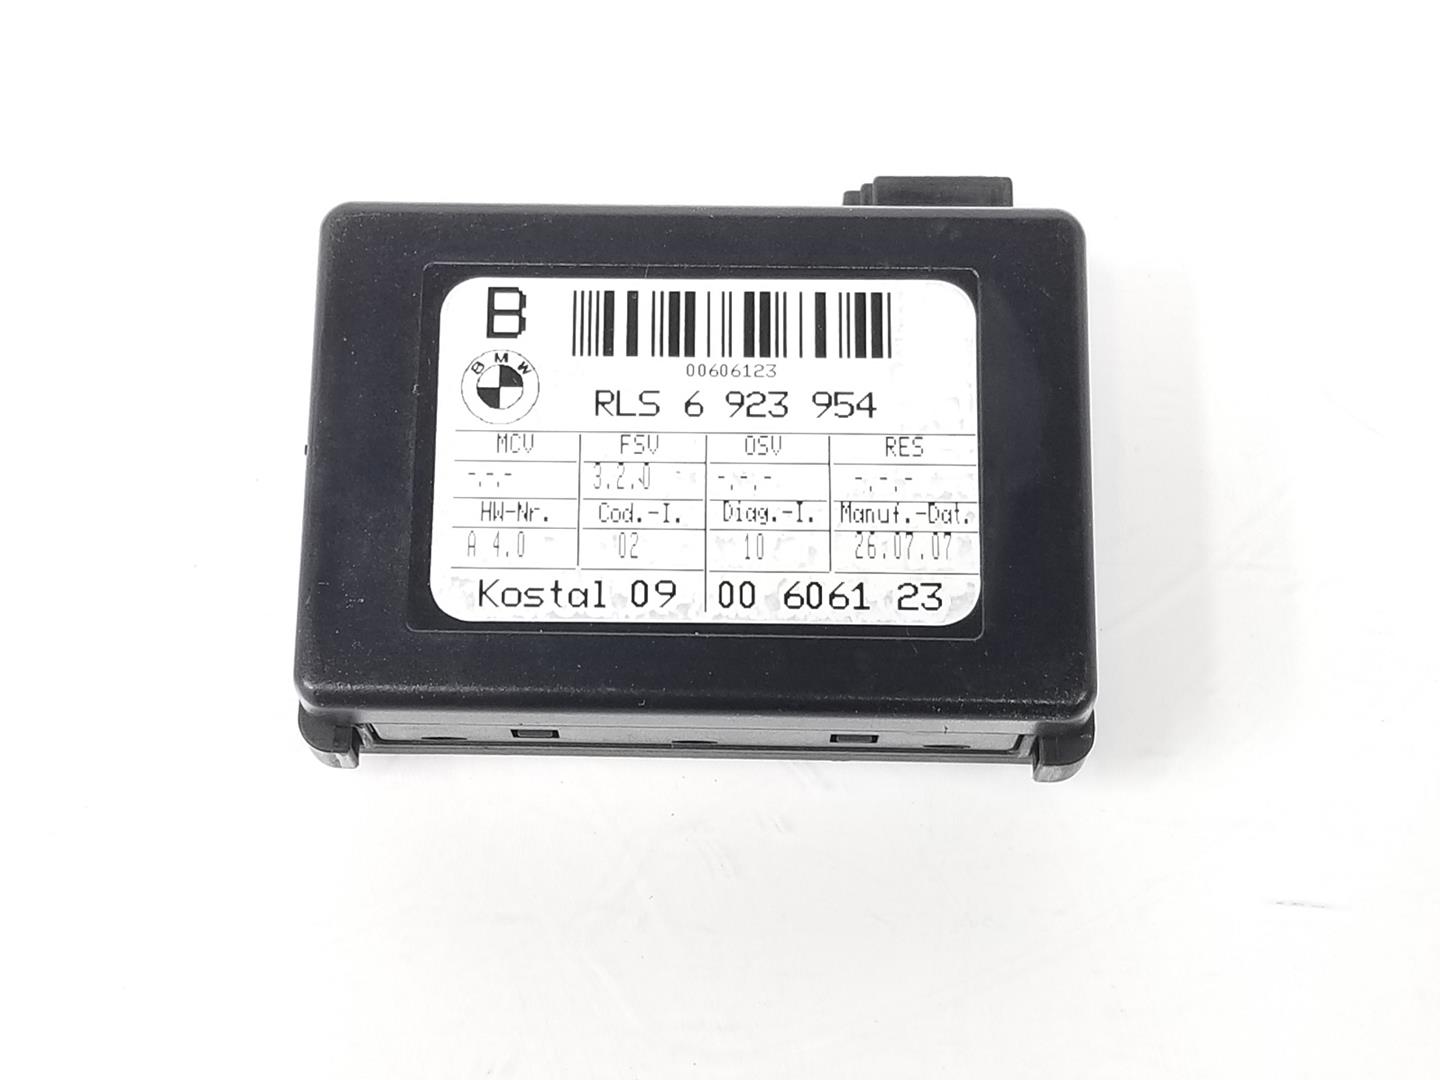 BMW X3 E83 (2003-2010) Other Control Units 6923954, 61356923954 19795759